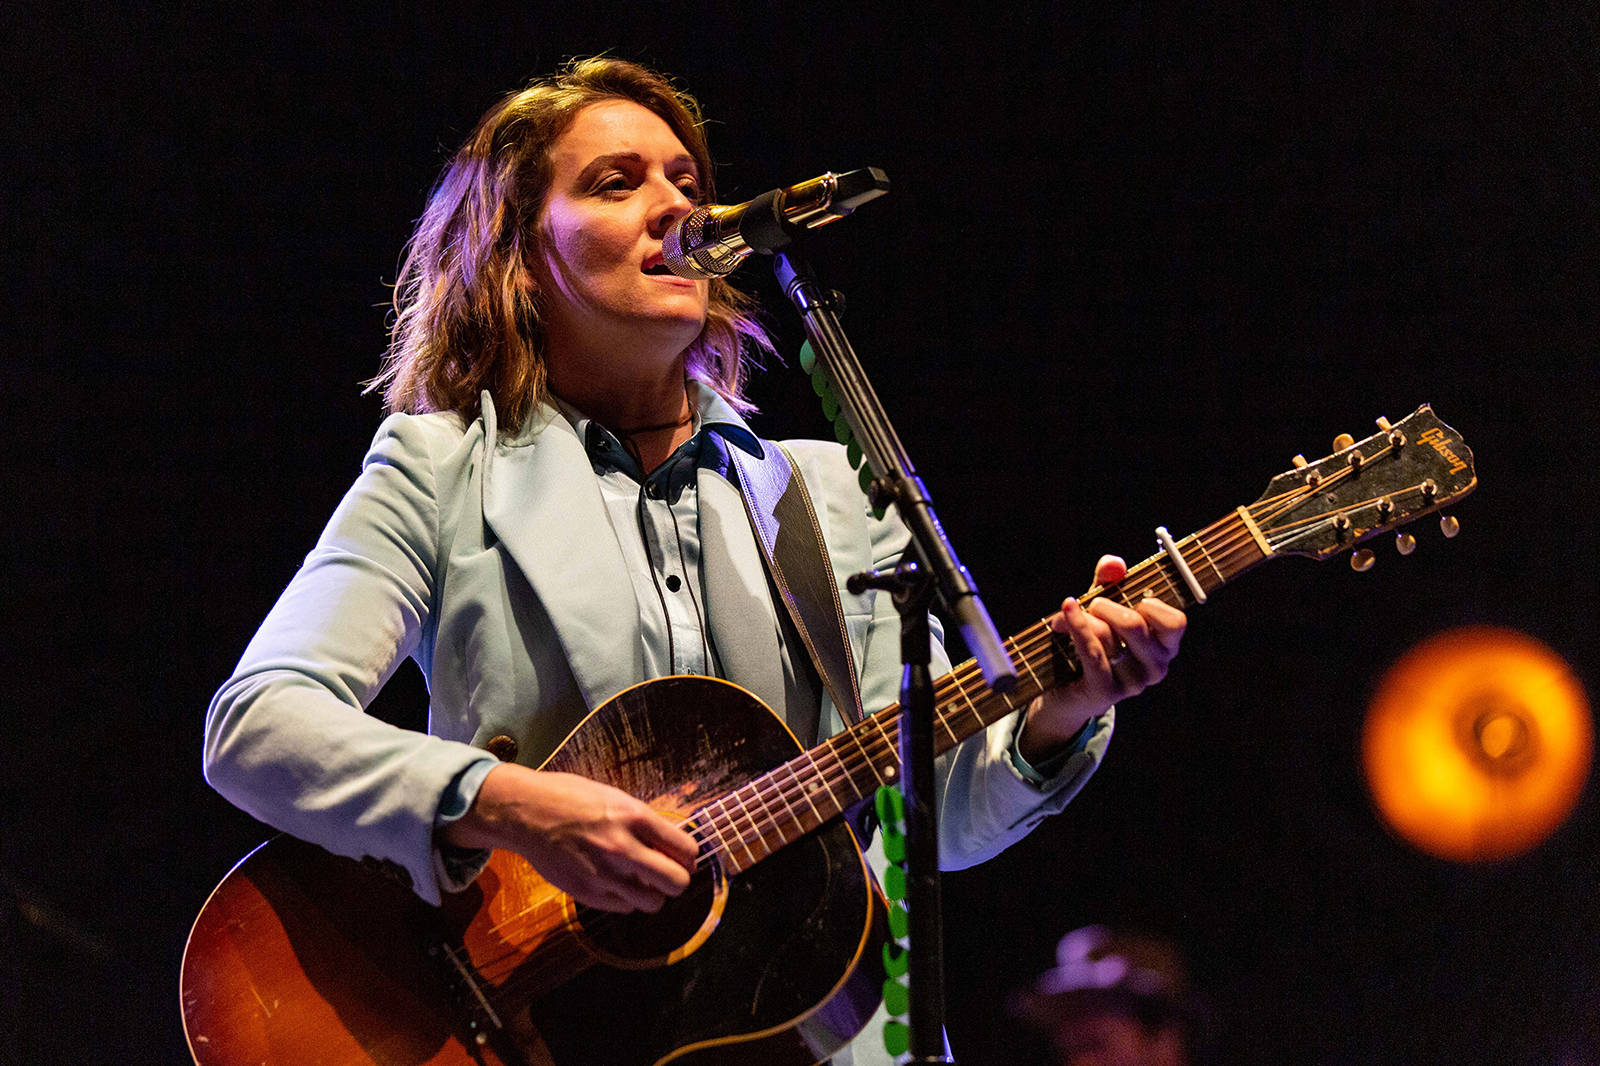 Daniel DeSlover/Zuma Press
On Sunday, Brandi Carlile’s country supergroup The Highwomen, could take home the best country song Grammy.